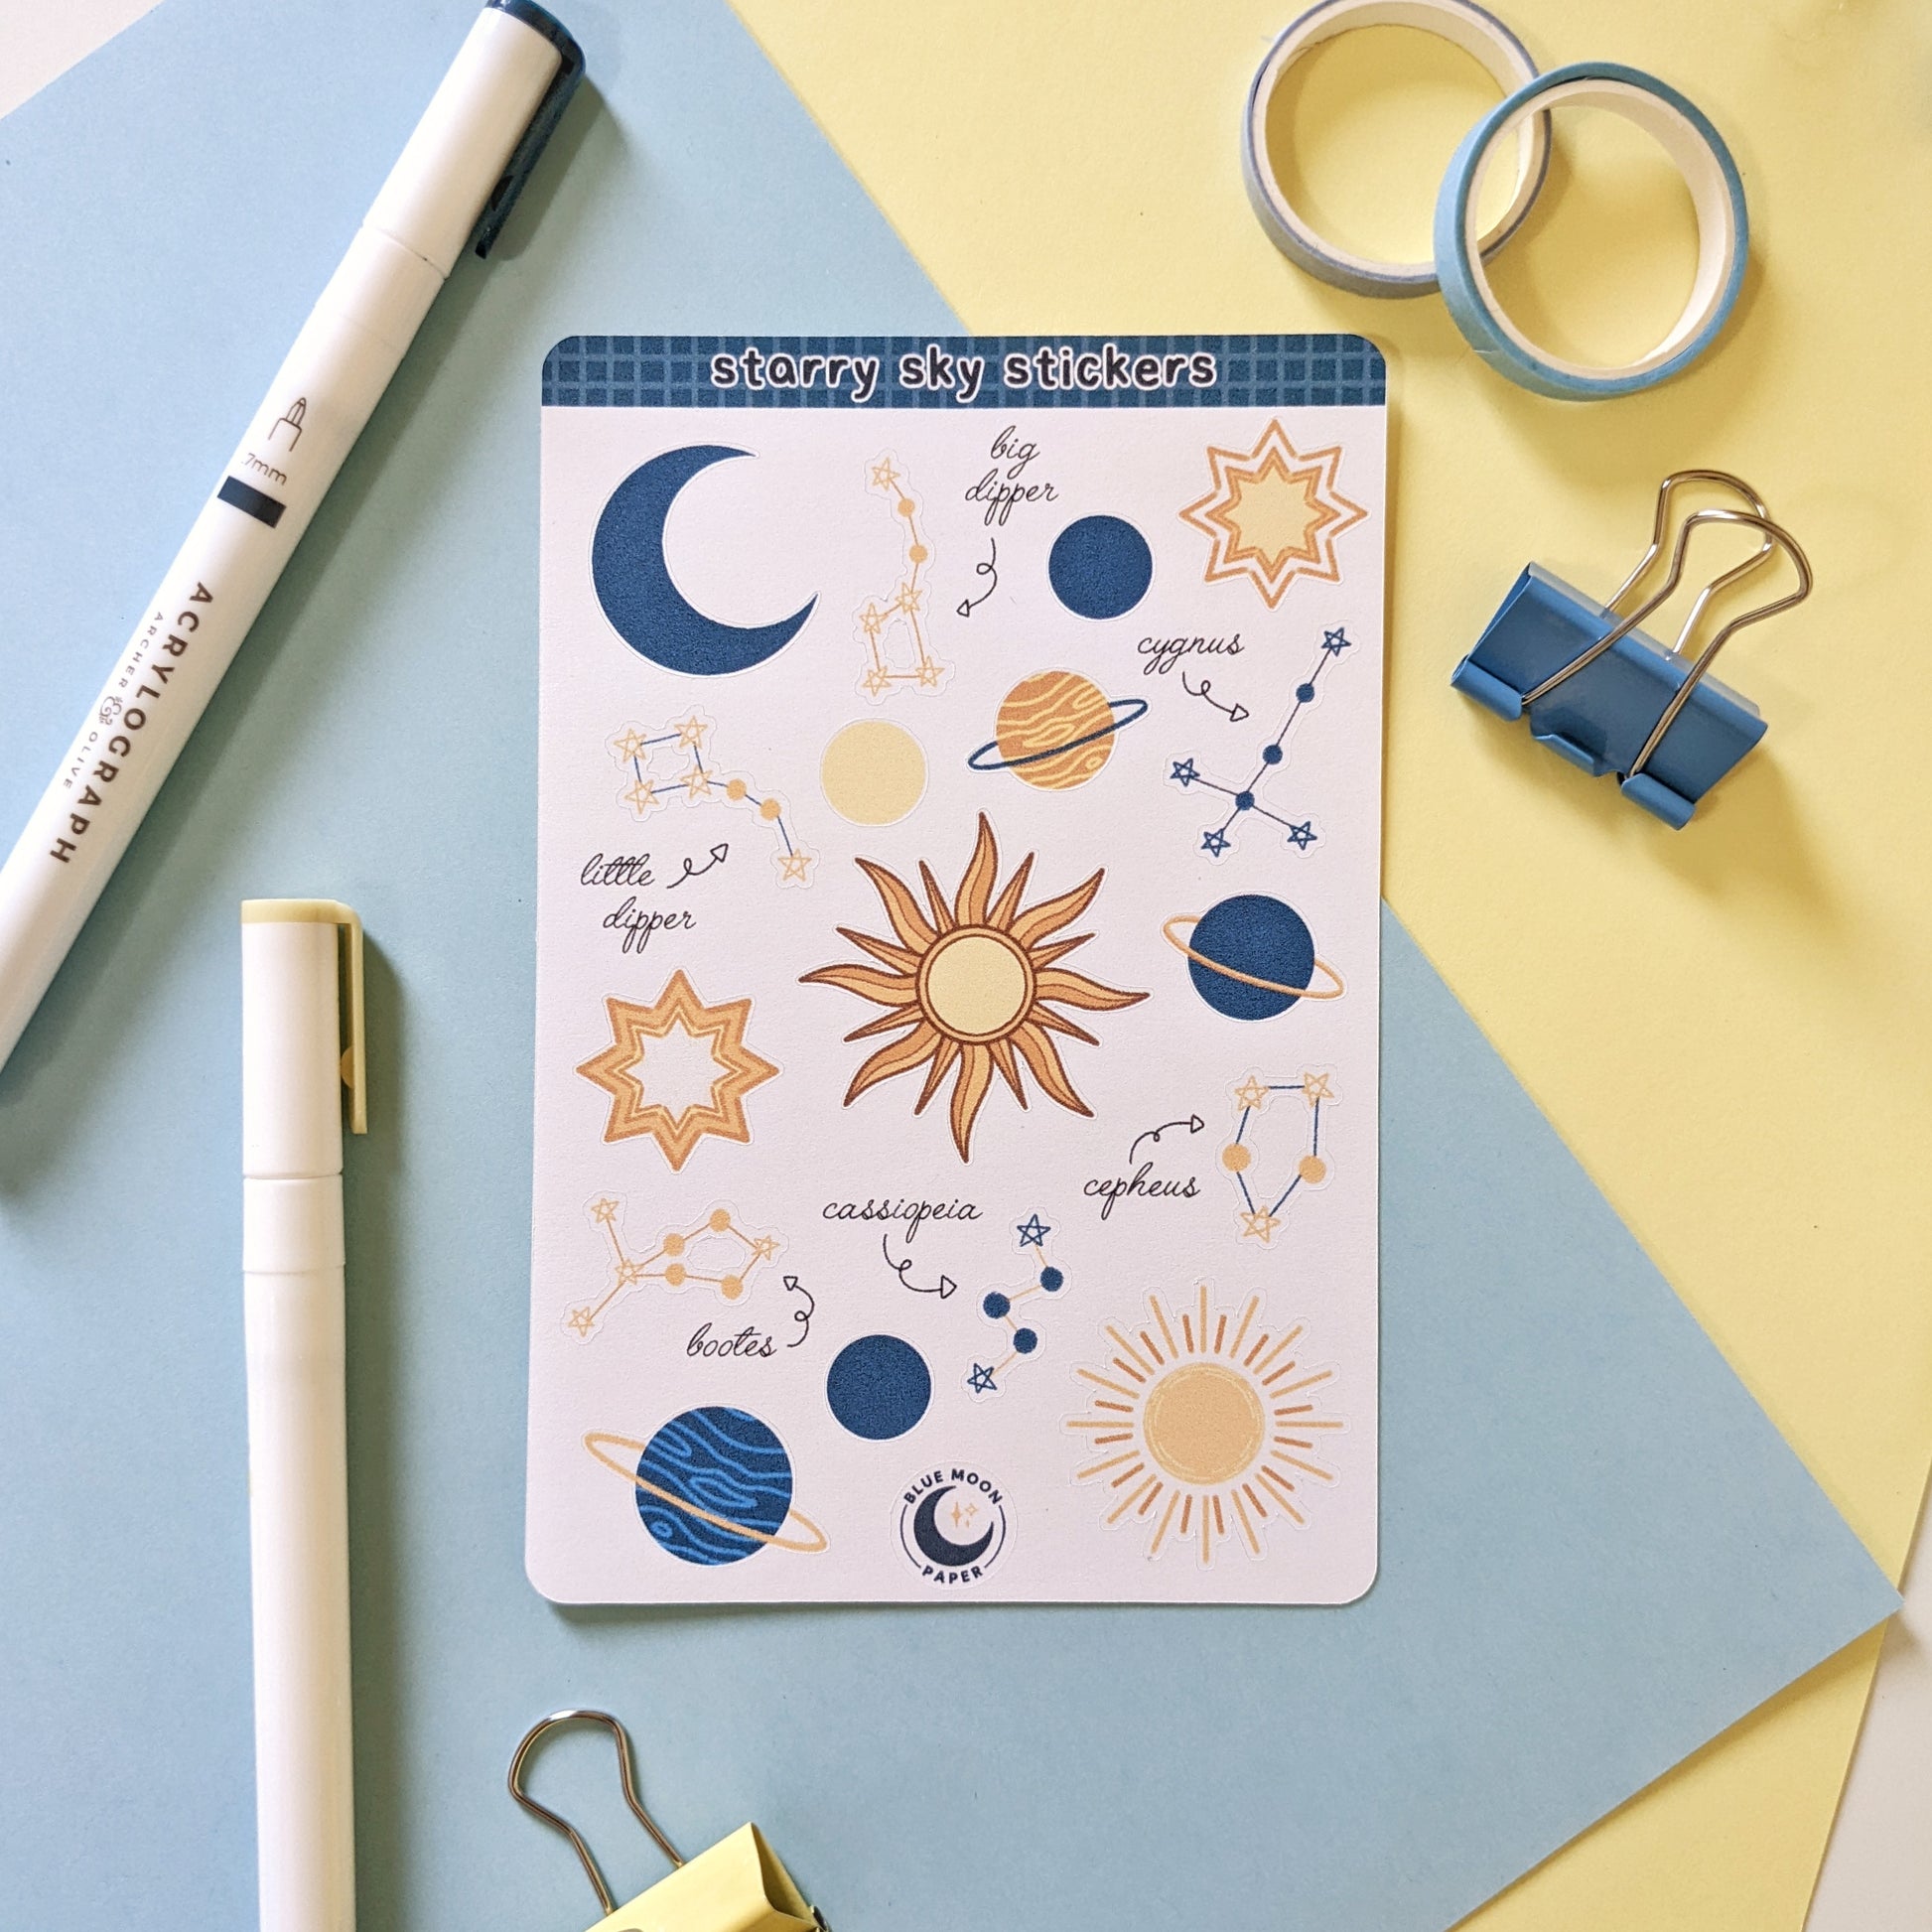 Sticker sheet featuring various illustrations of constellations, stars, and planets.